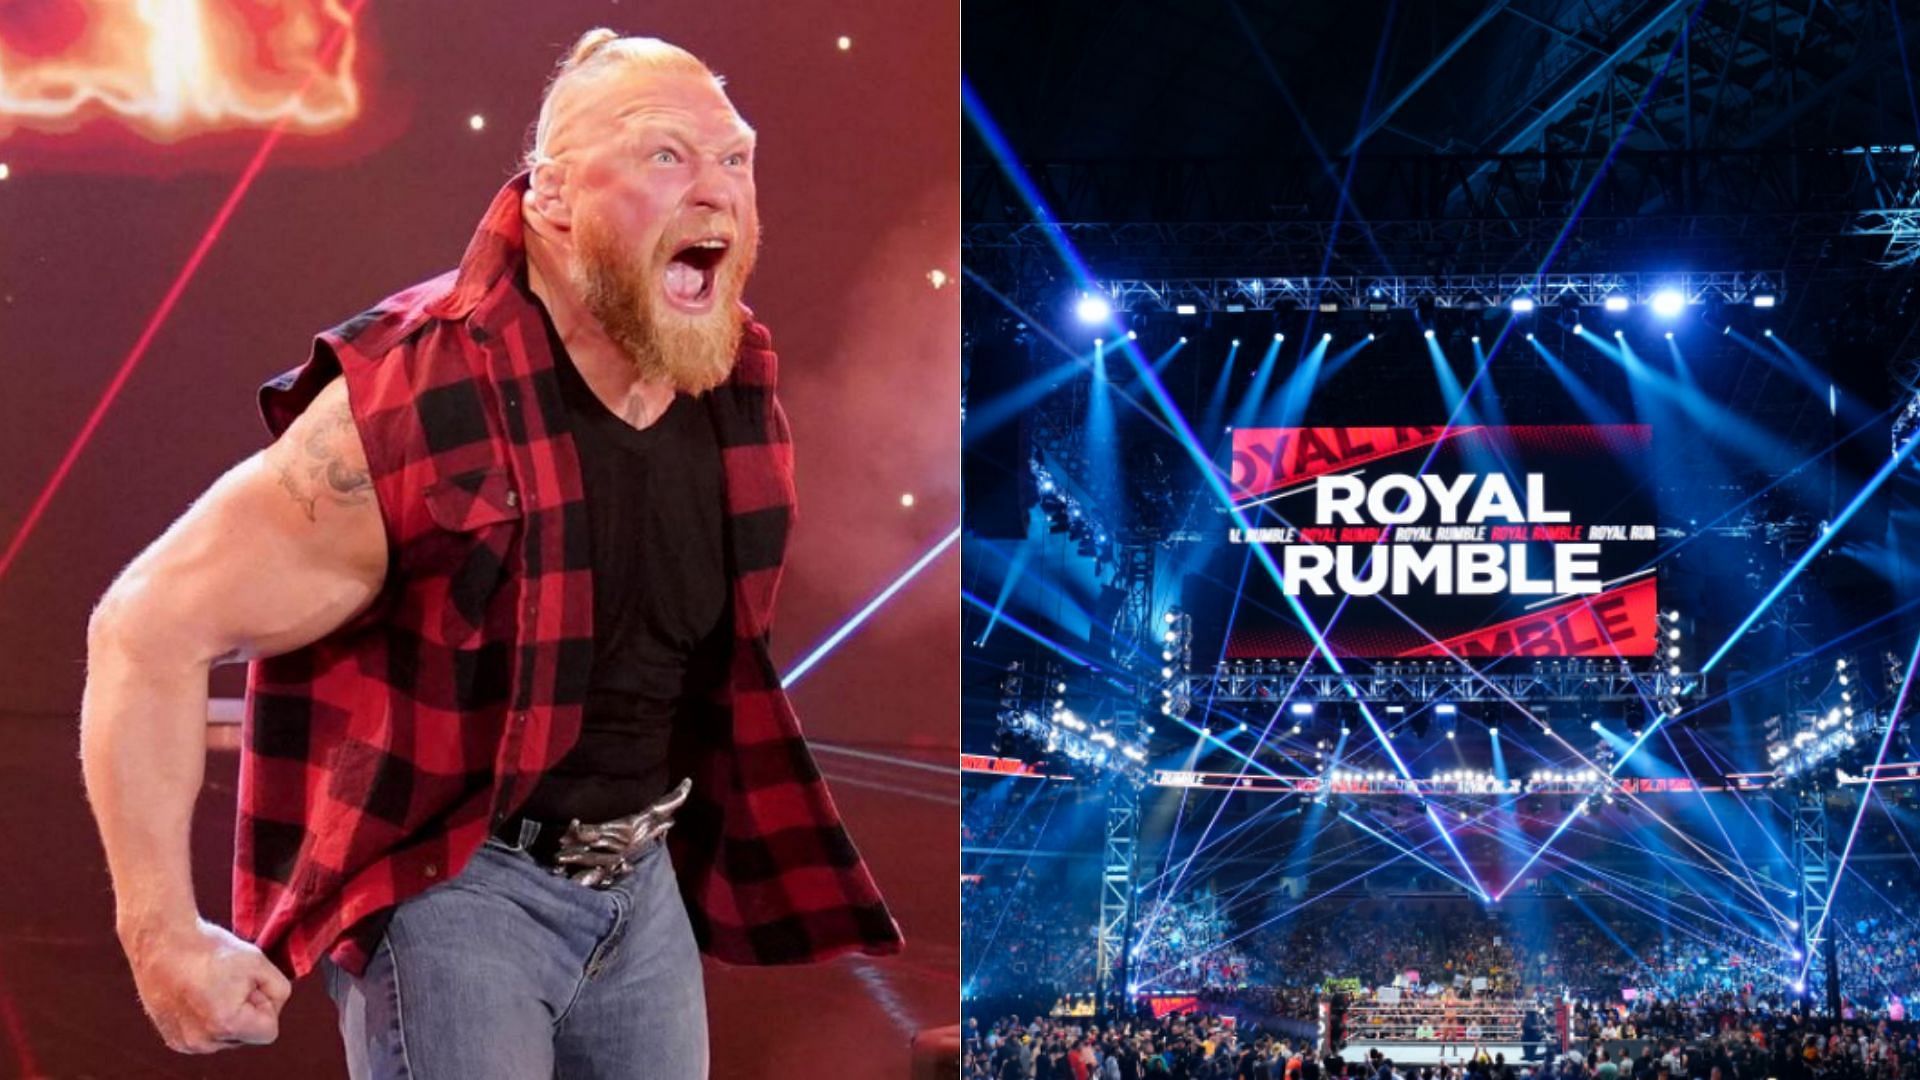 Brock Lesnar vs. Bobby Lashley has been announced for the Royal Rumble